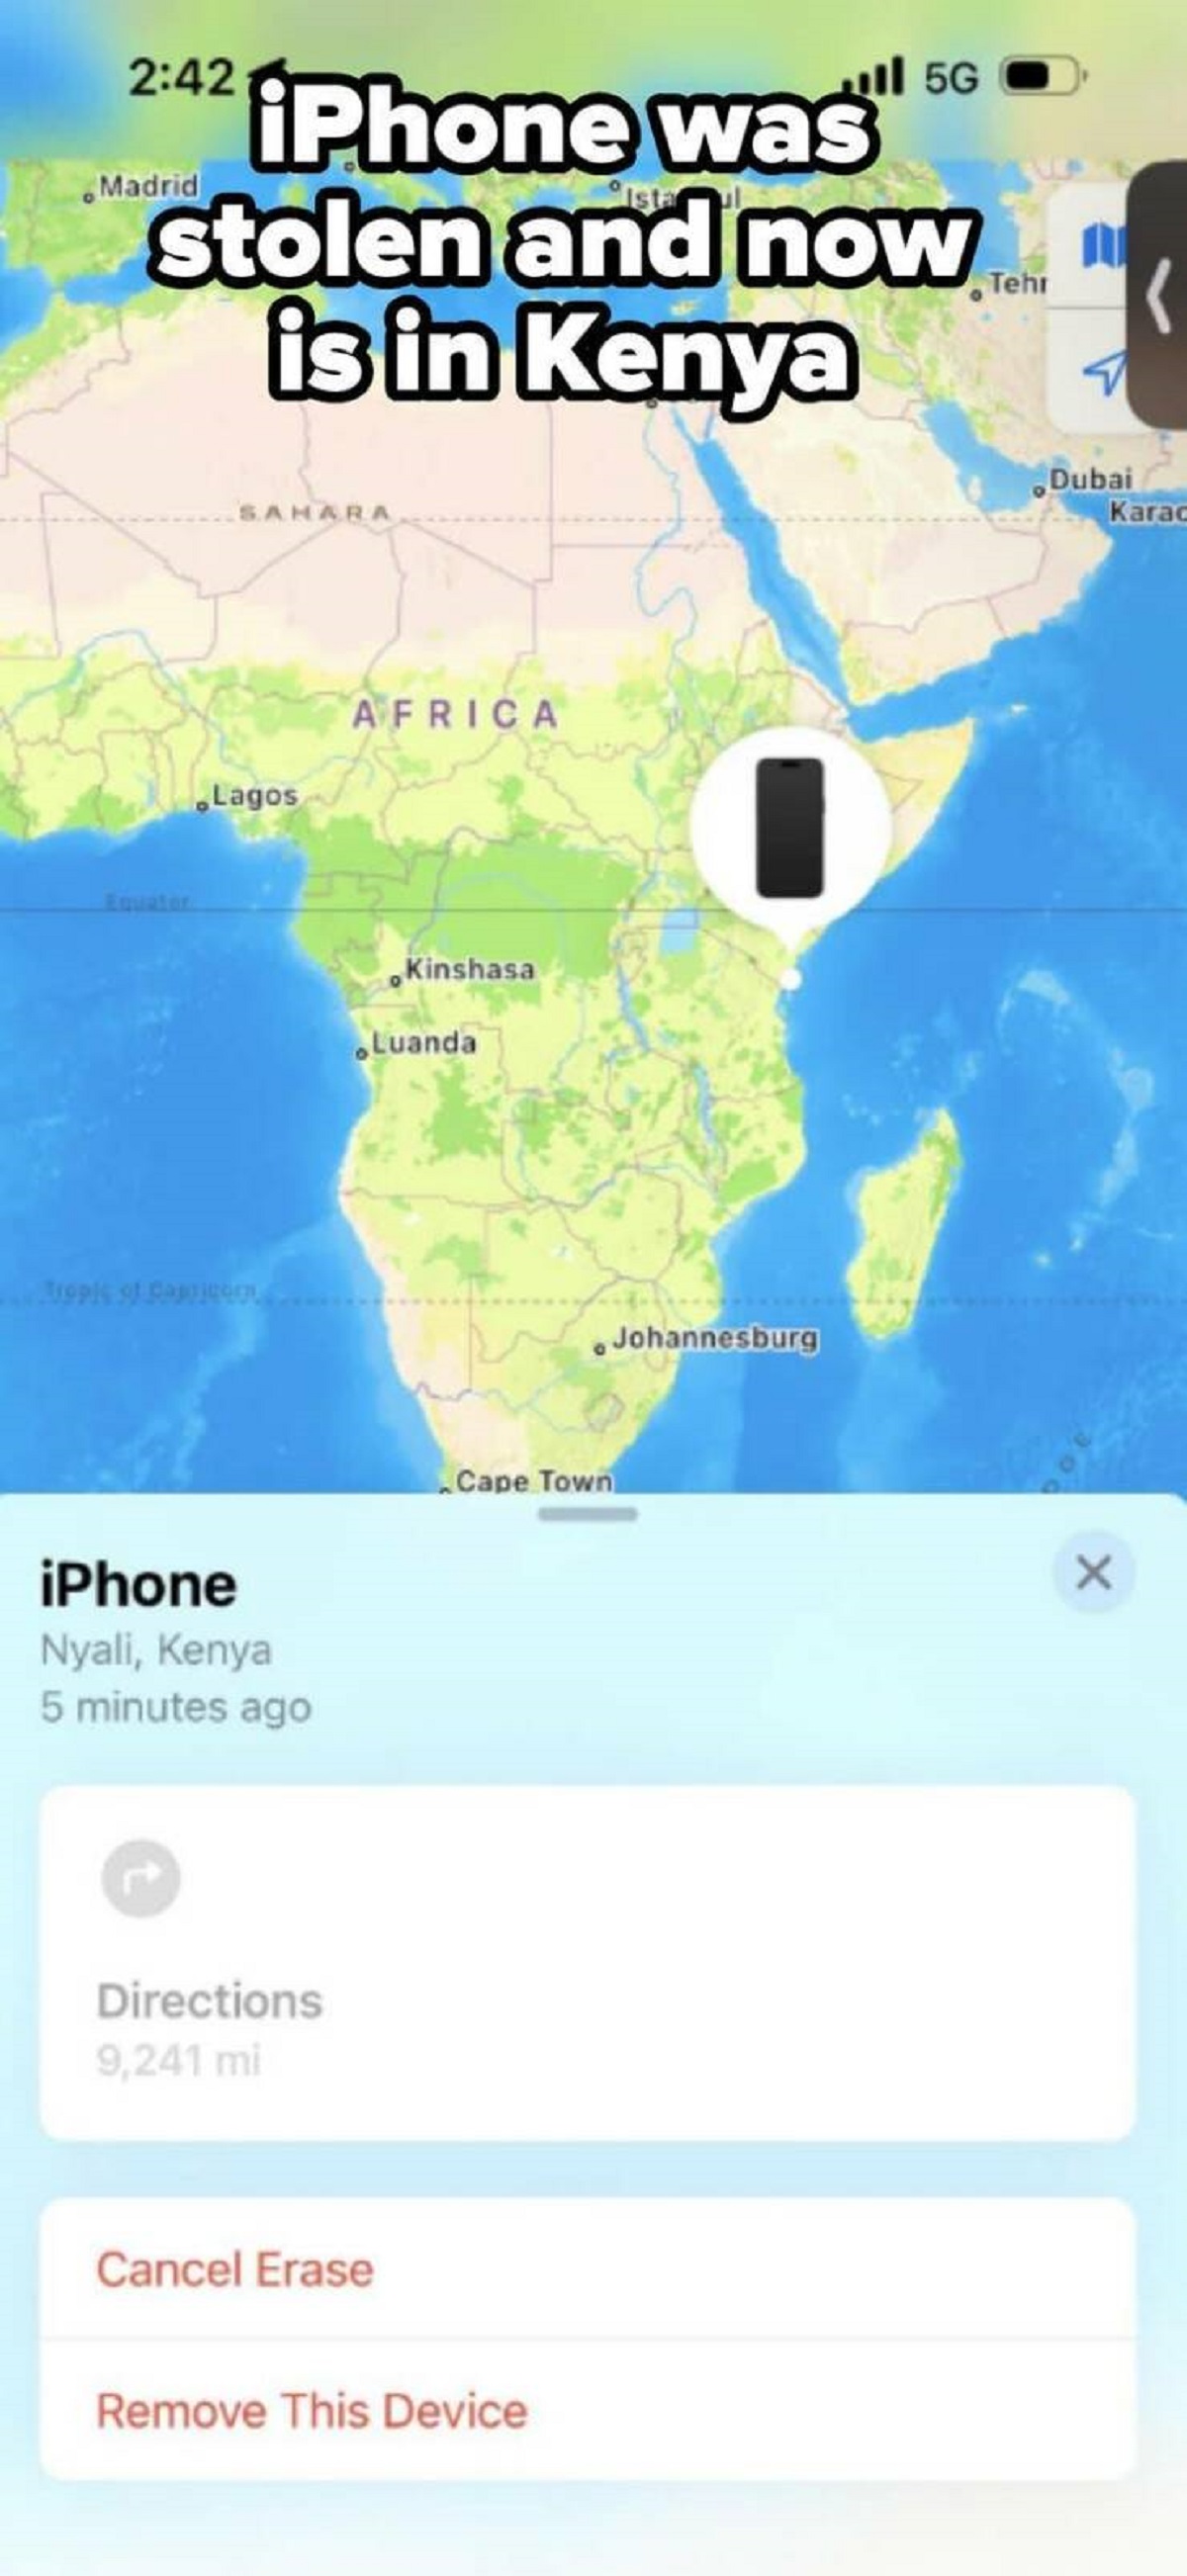 atlas - iPhone was stolen and now is in Kenya Lag iPhone Nya, Kenya 5 minutes ago Directions Africa anda Cape Tow Cancel Erase Remove This Device